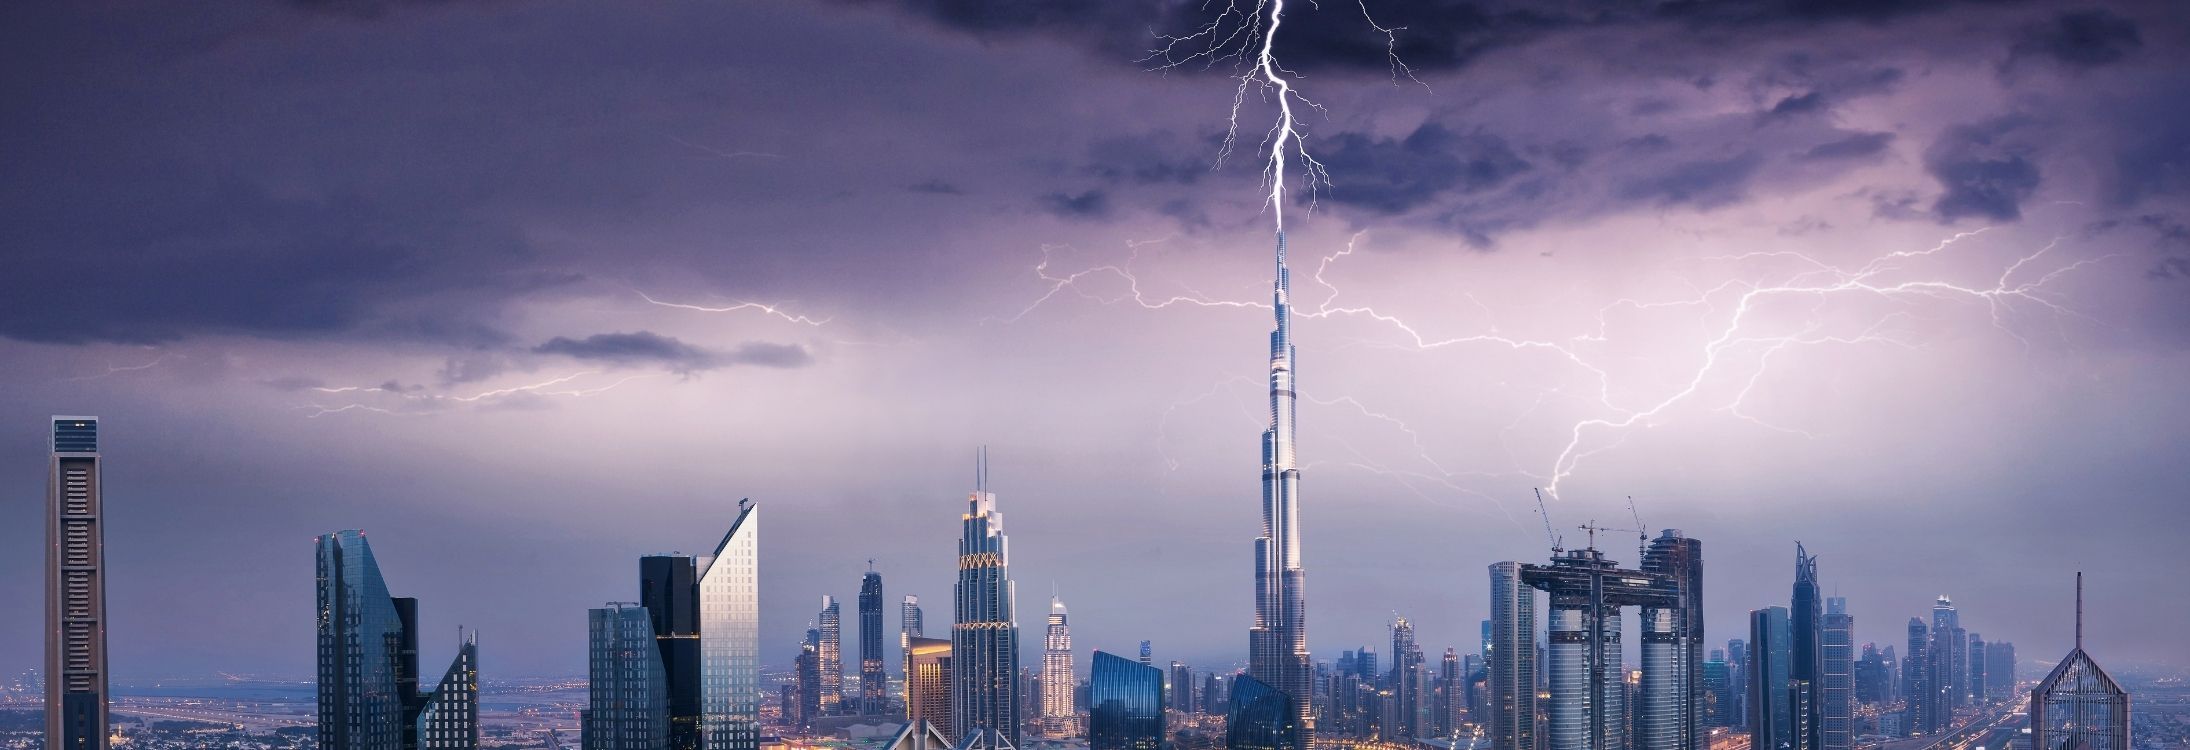 Pictures of famous buildings struck by lightning